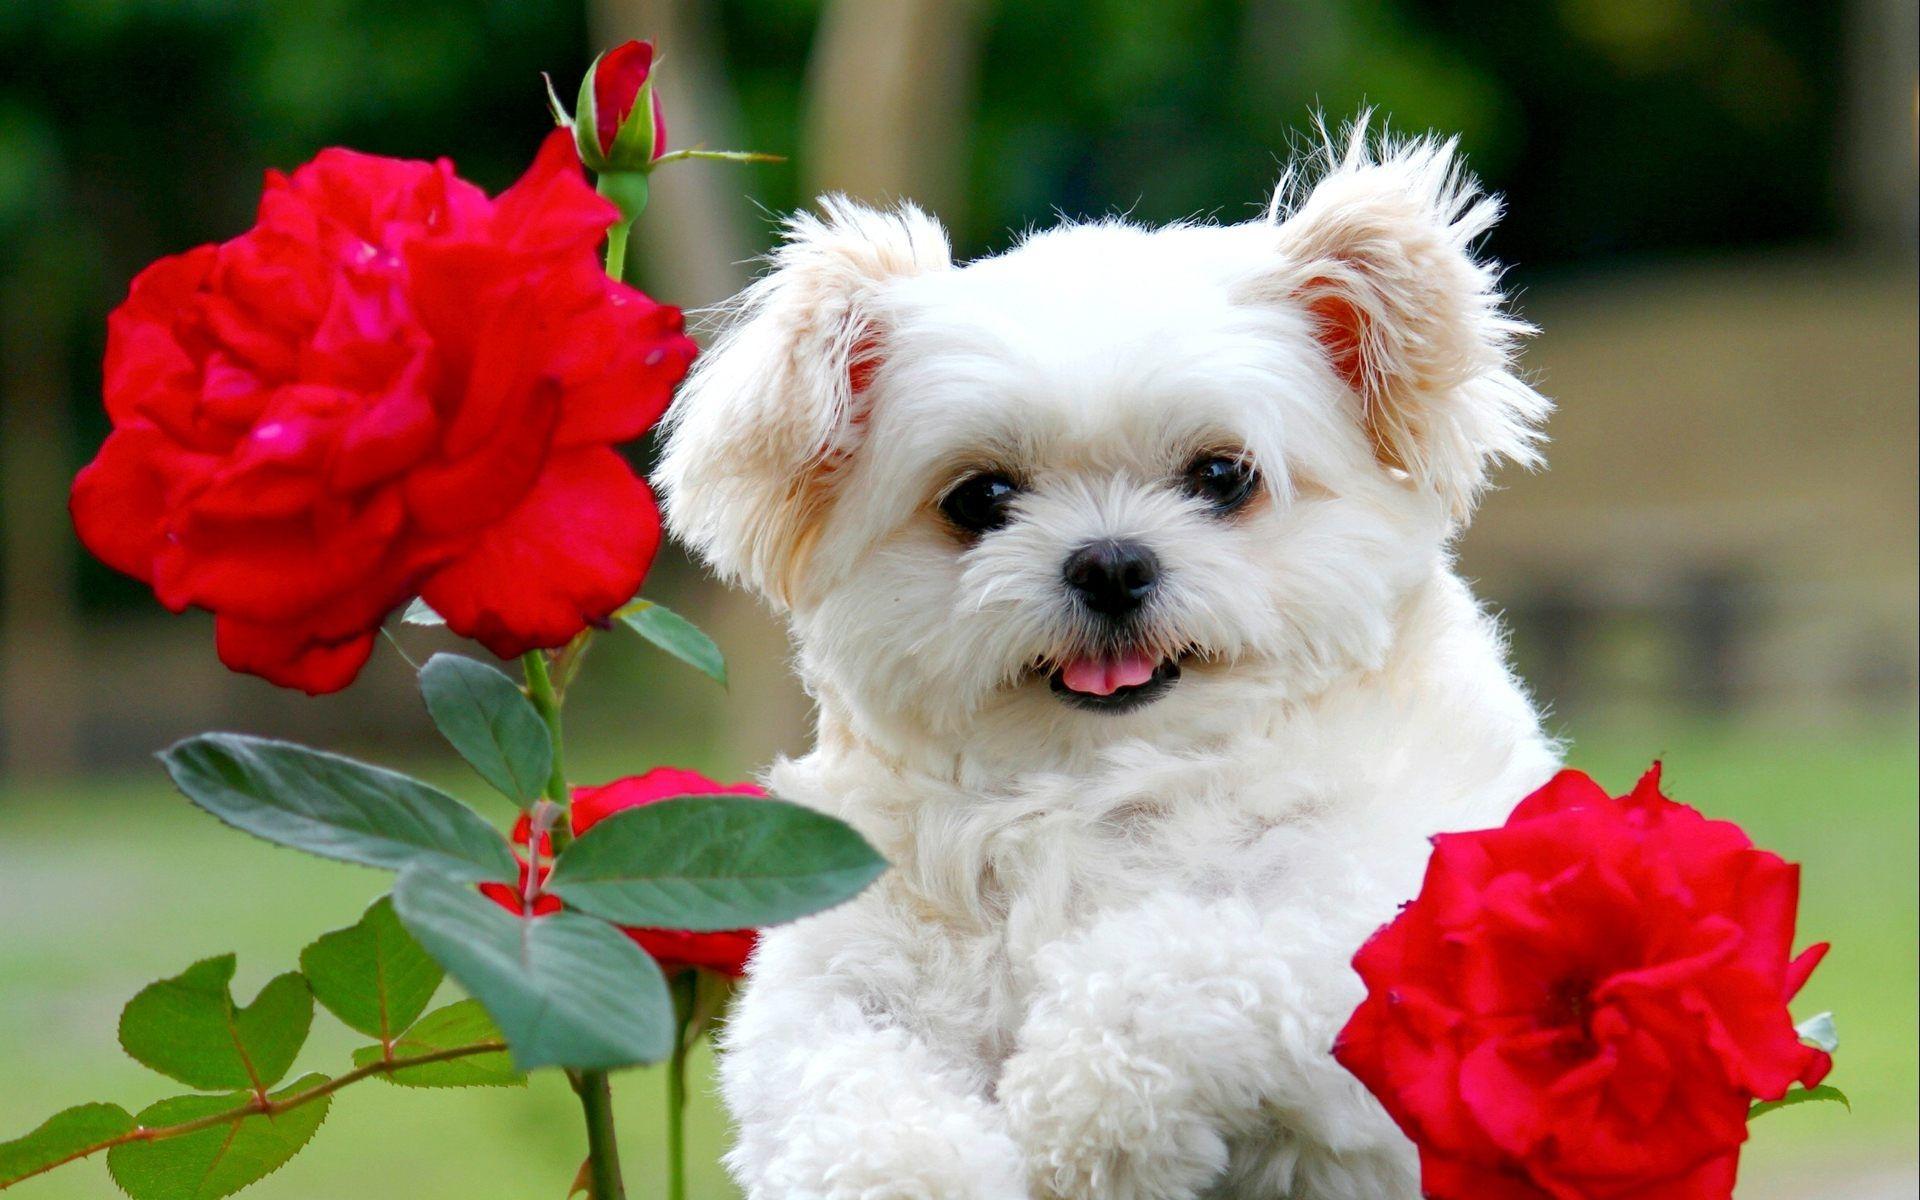 Cute white puppy with red rose flowers. HD Wallpaper Rocks. Cute puppy wallpaper, Cute fluffy puppies, Cute white puppies